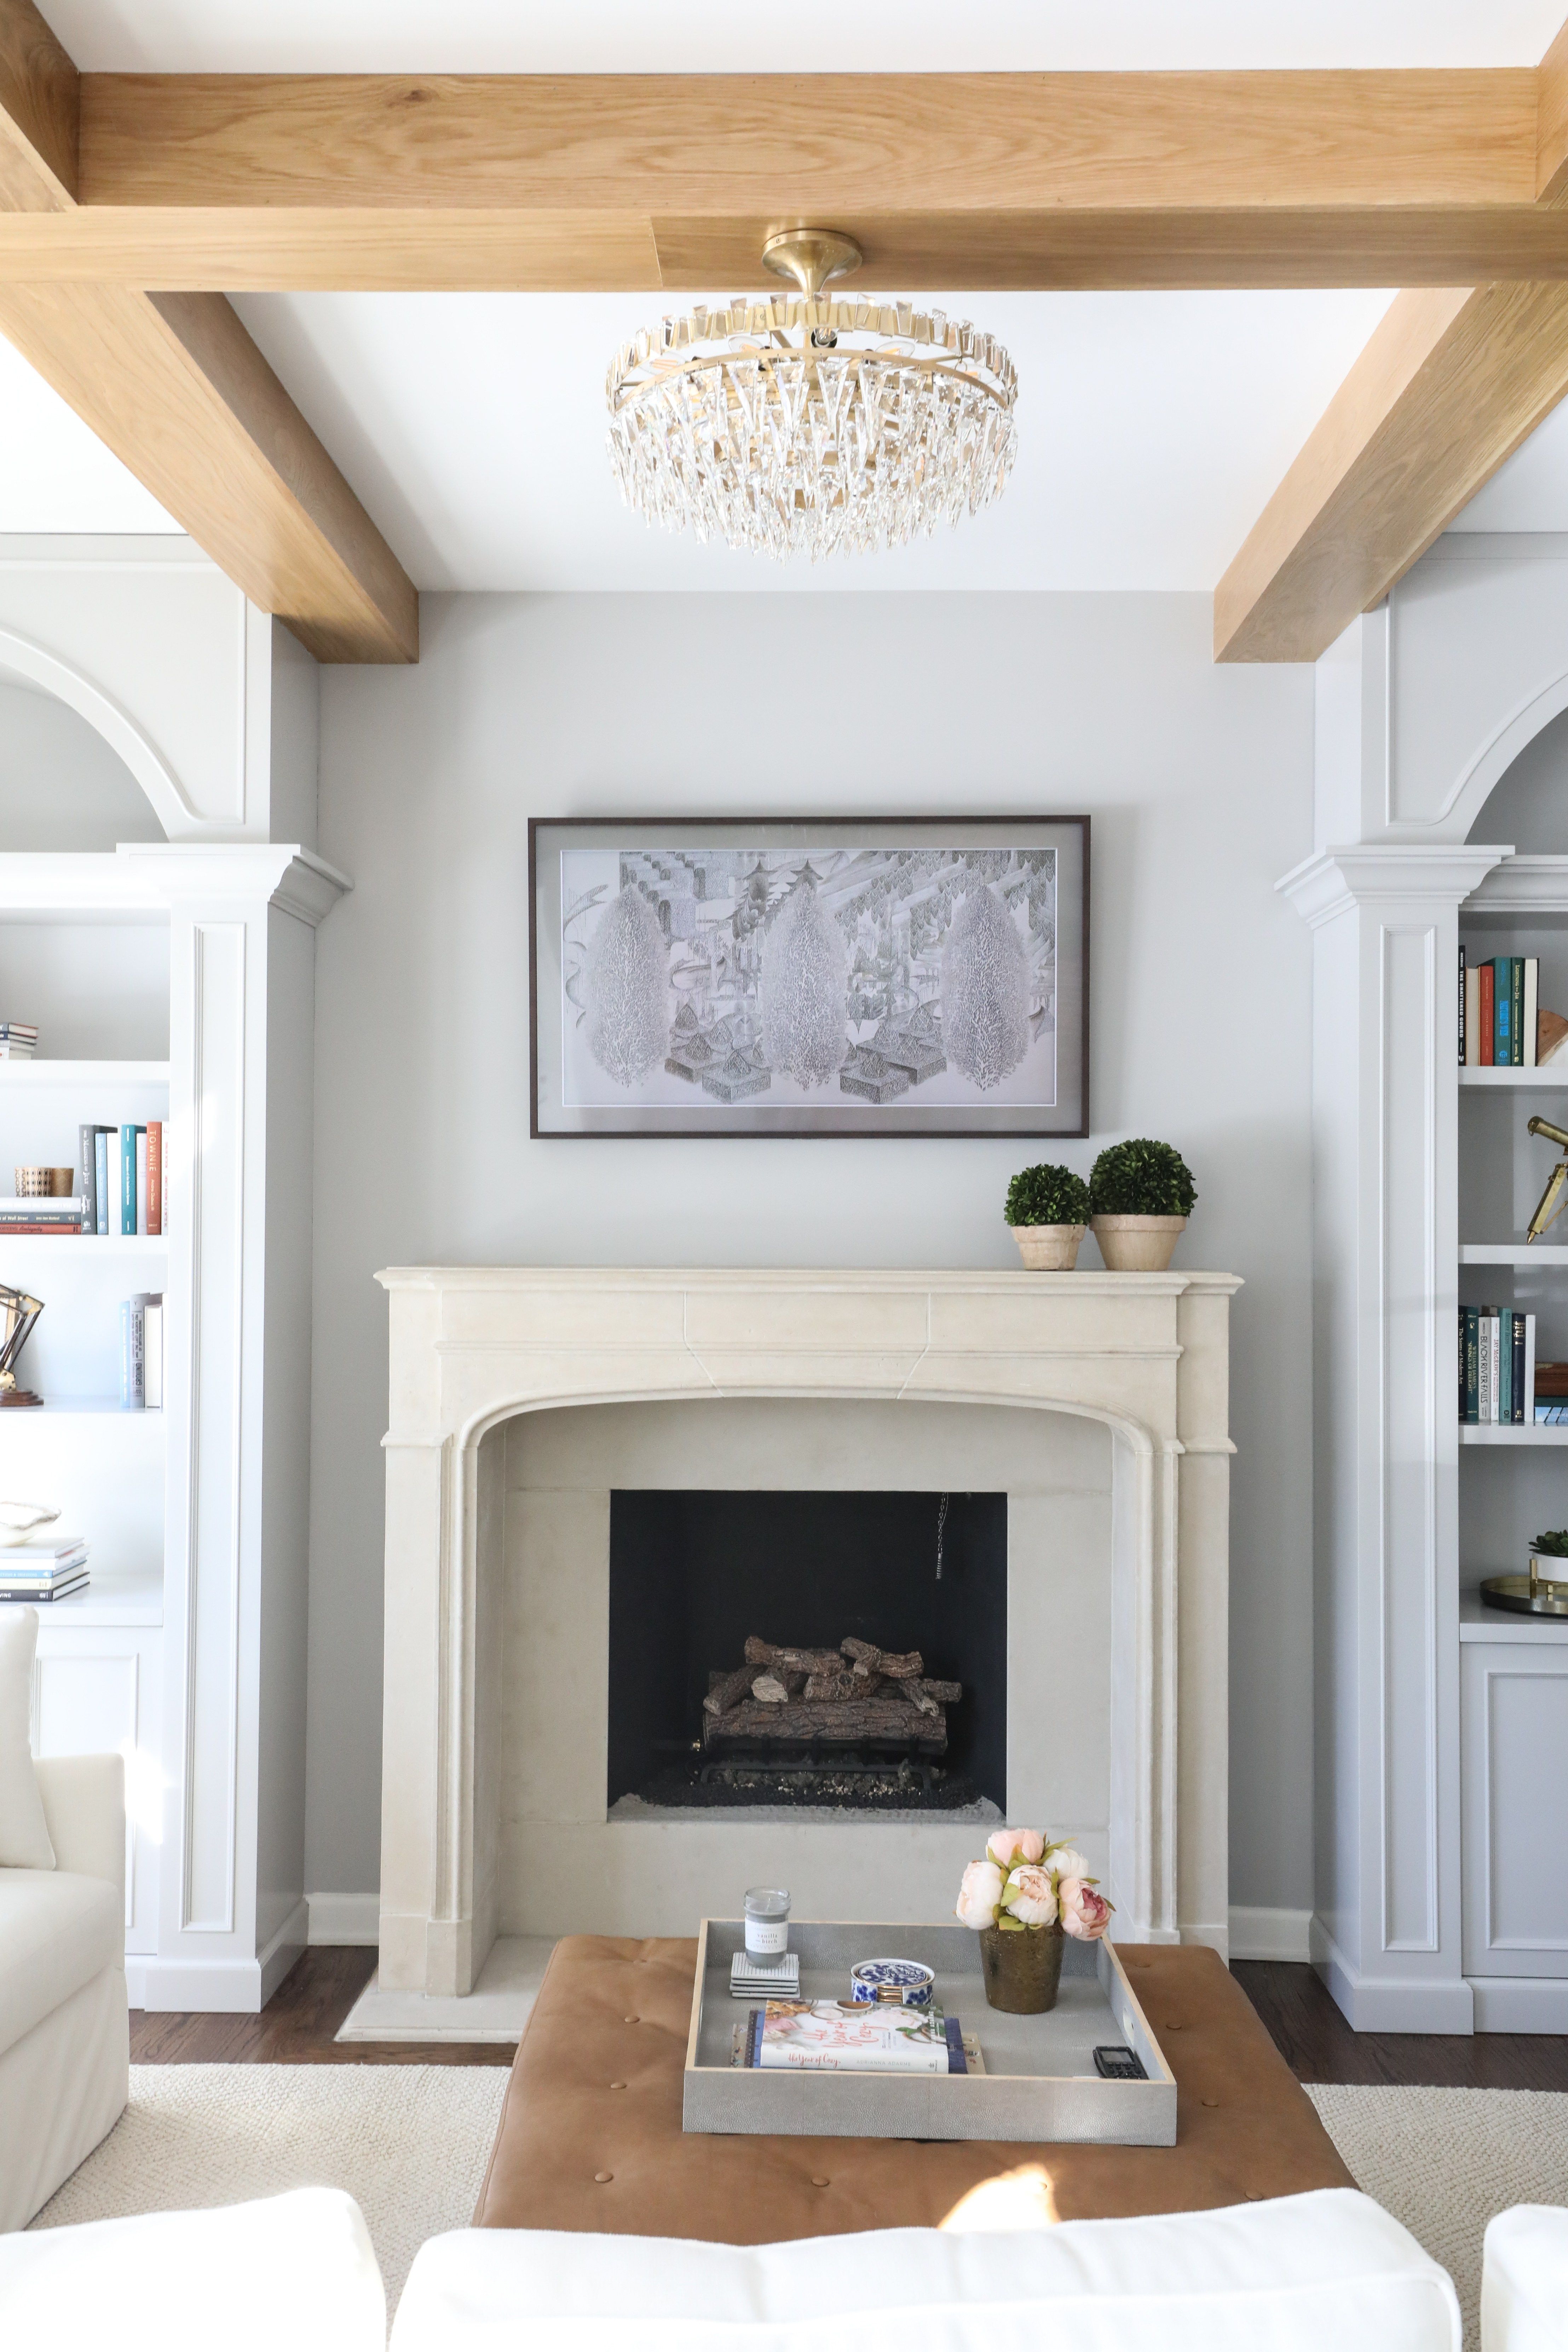 Fireplace solutions Awesome Arched Built Ins Park & Oak Design